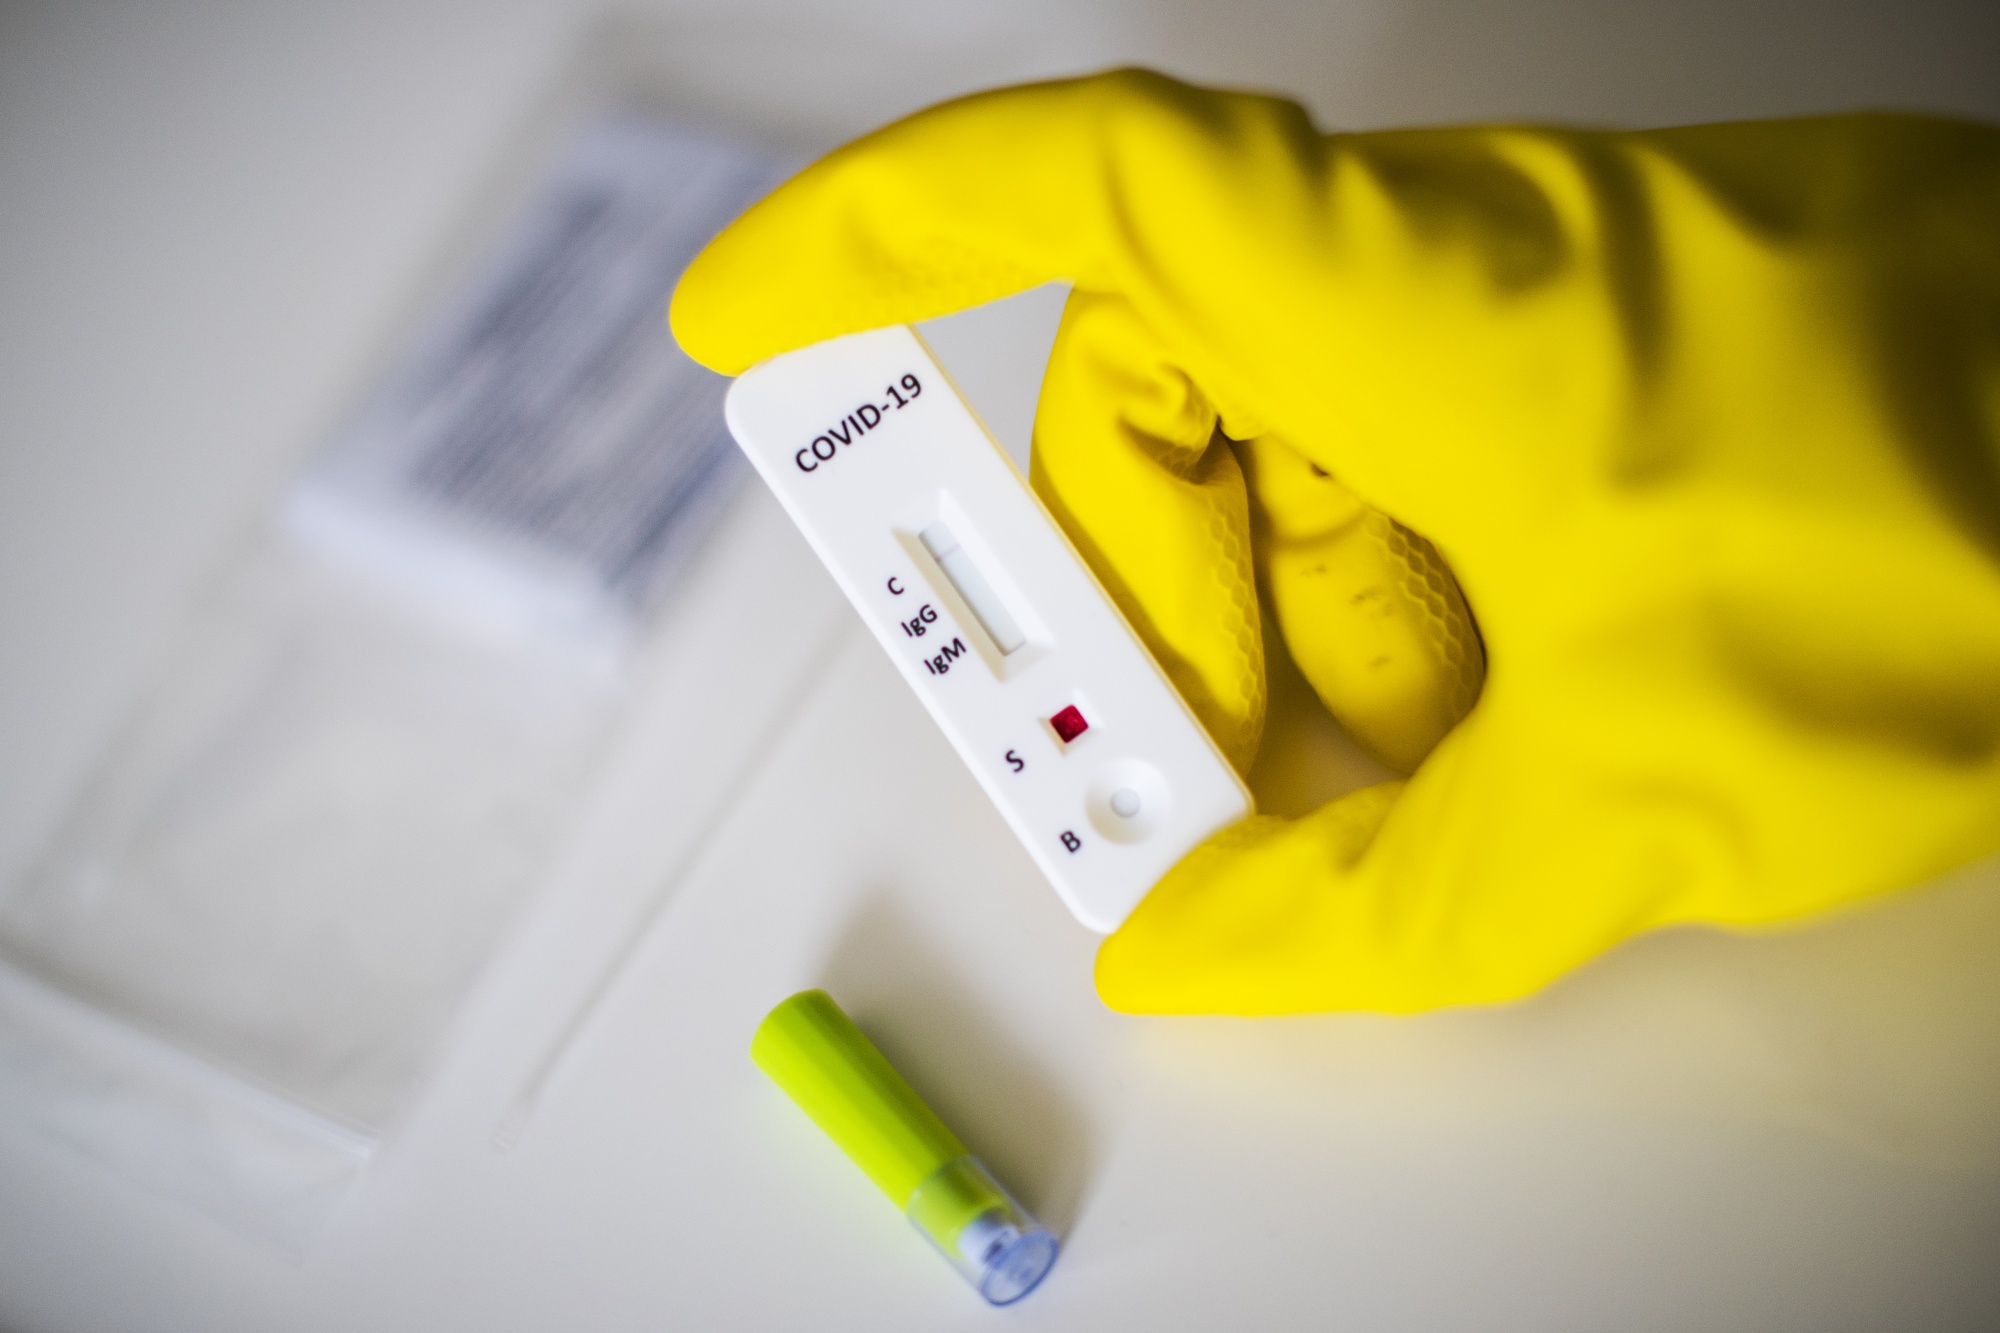 An at-home Premier Biotech Inc. Covid-19 antibody rapid test cassette.